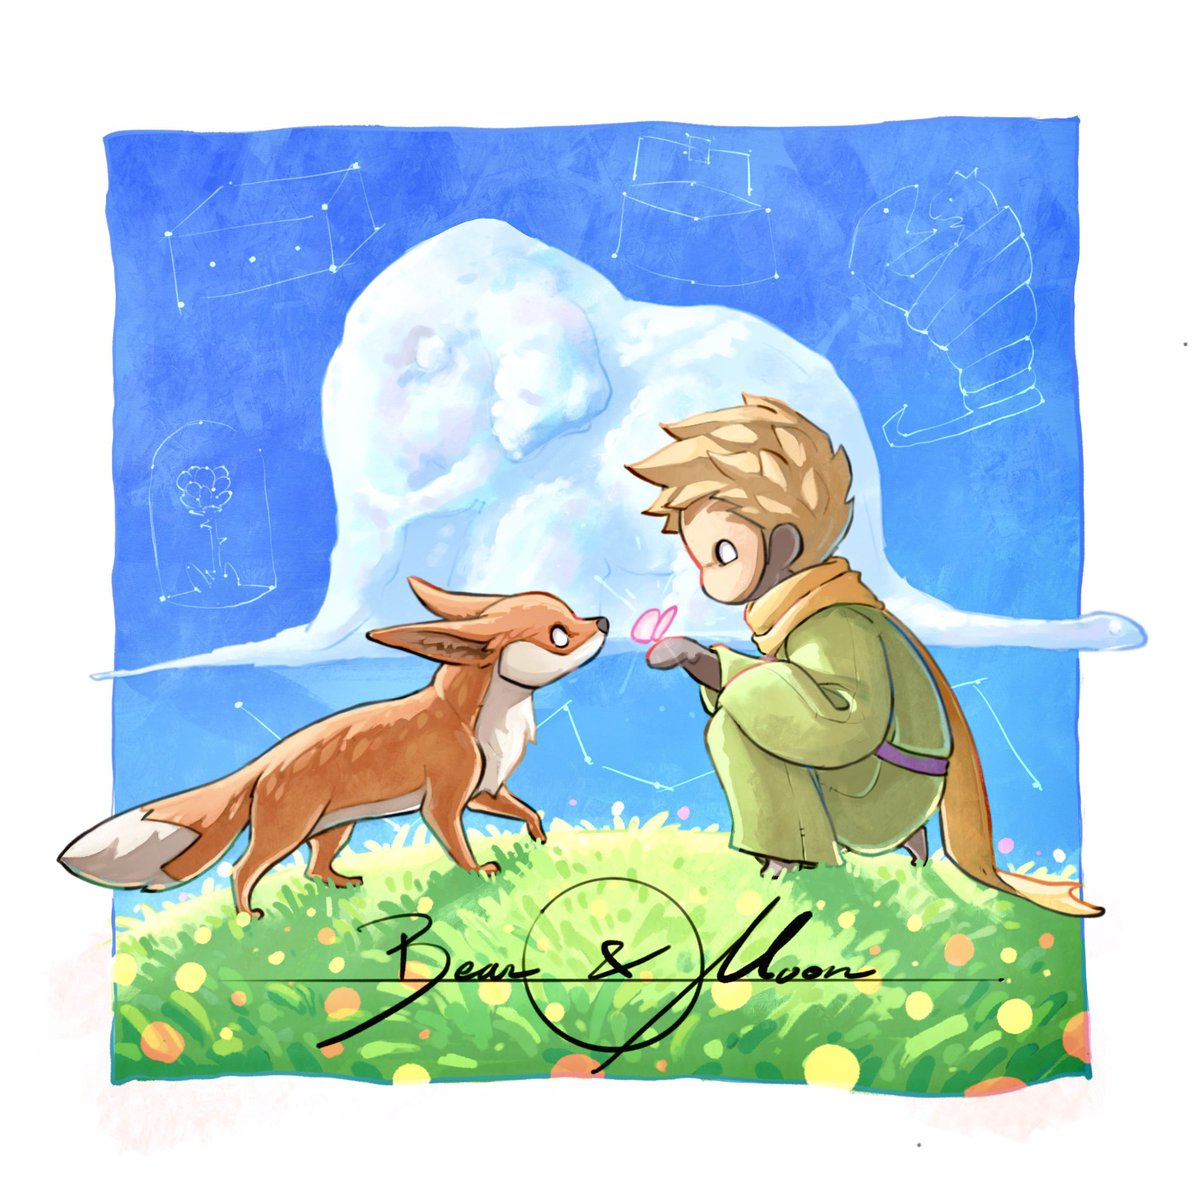 Little prince and the fox 🦊 “Let your dream devour your life, not your life devour your dream.” — Antoine de Saint-Exupéry ⭐️ #skycotlfanart #sky星を紡ぐ子どもたちイラスト #星の王子さま #thelittleprince